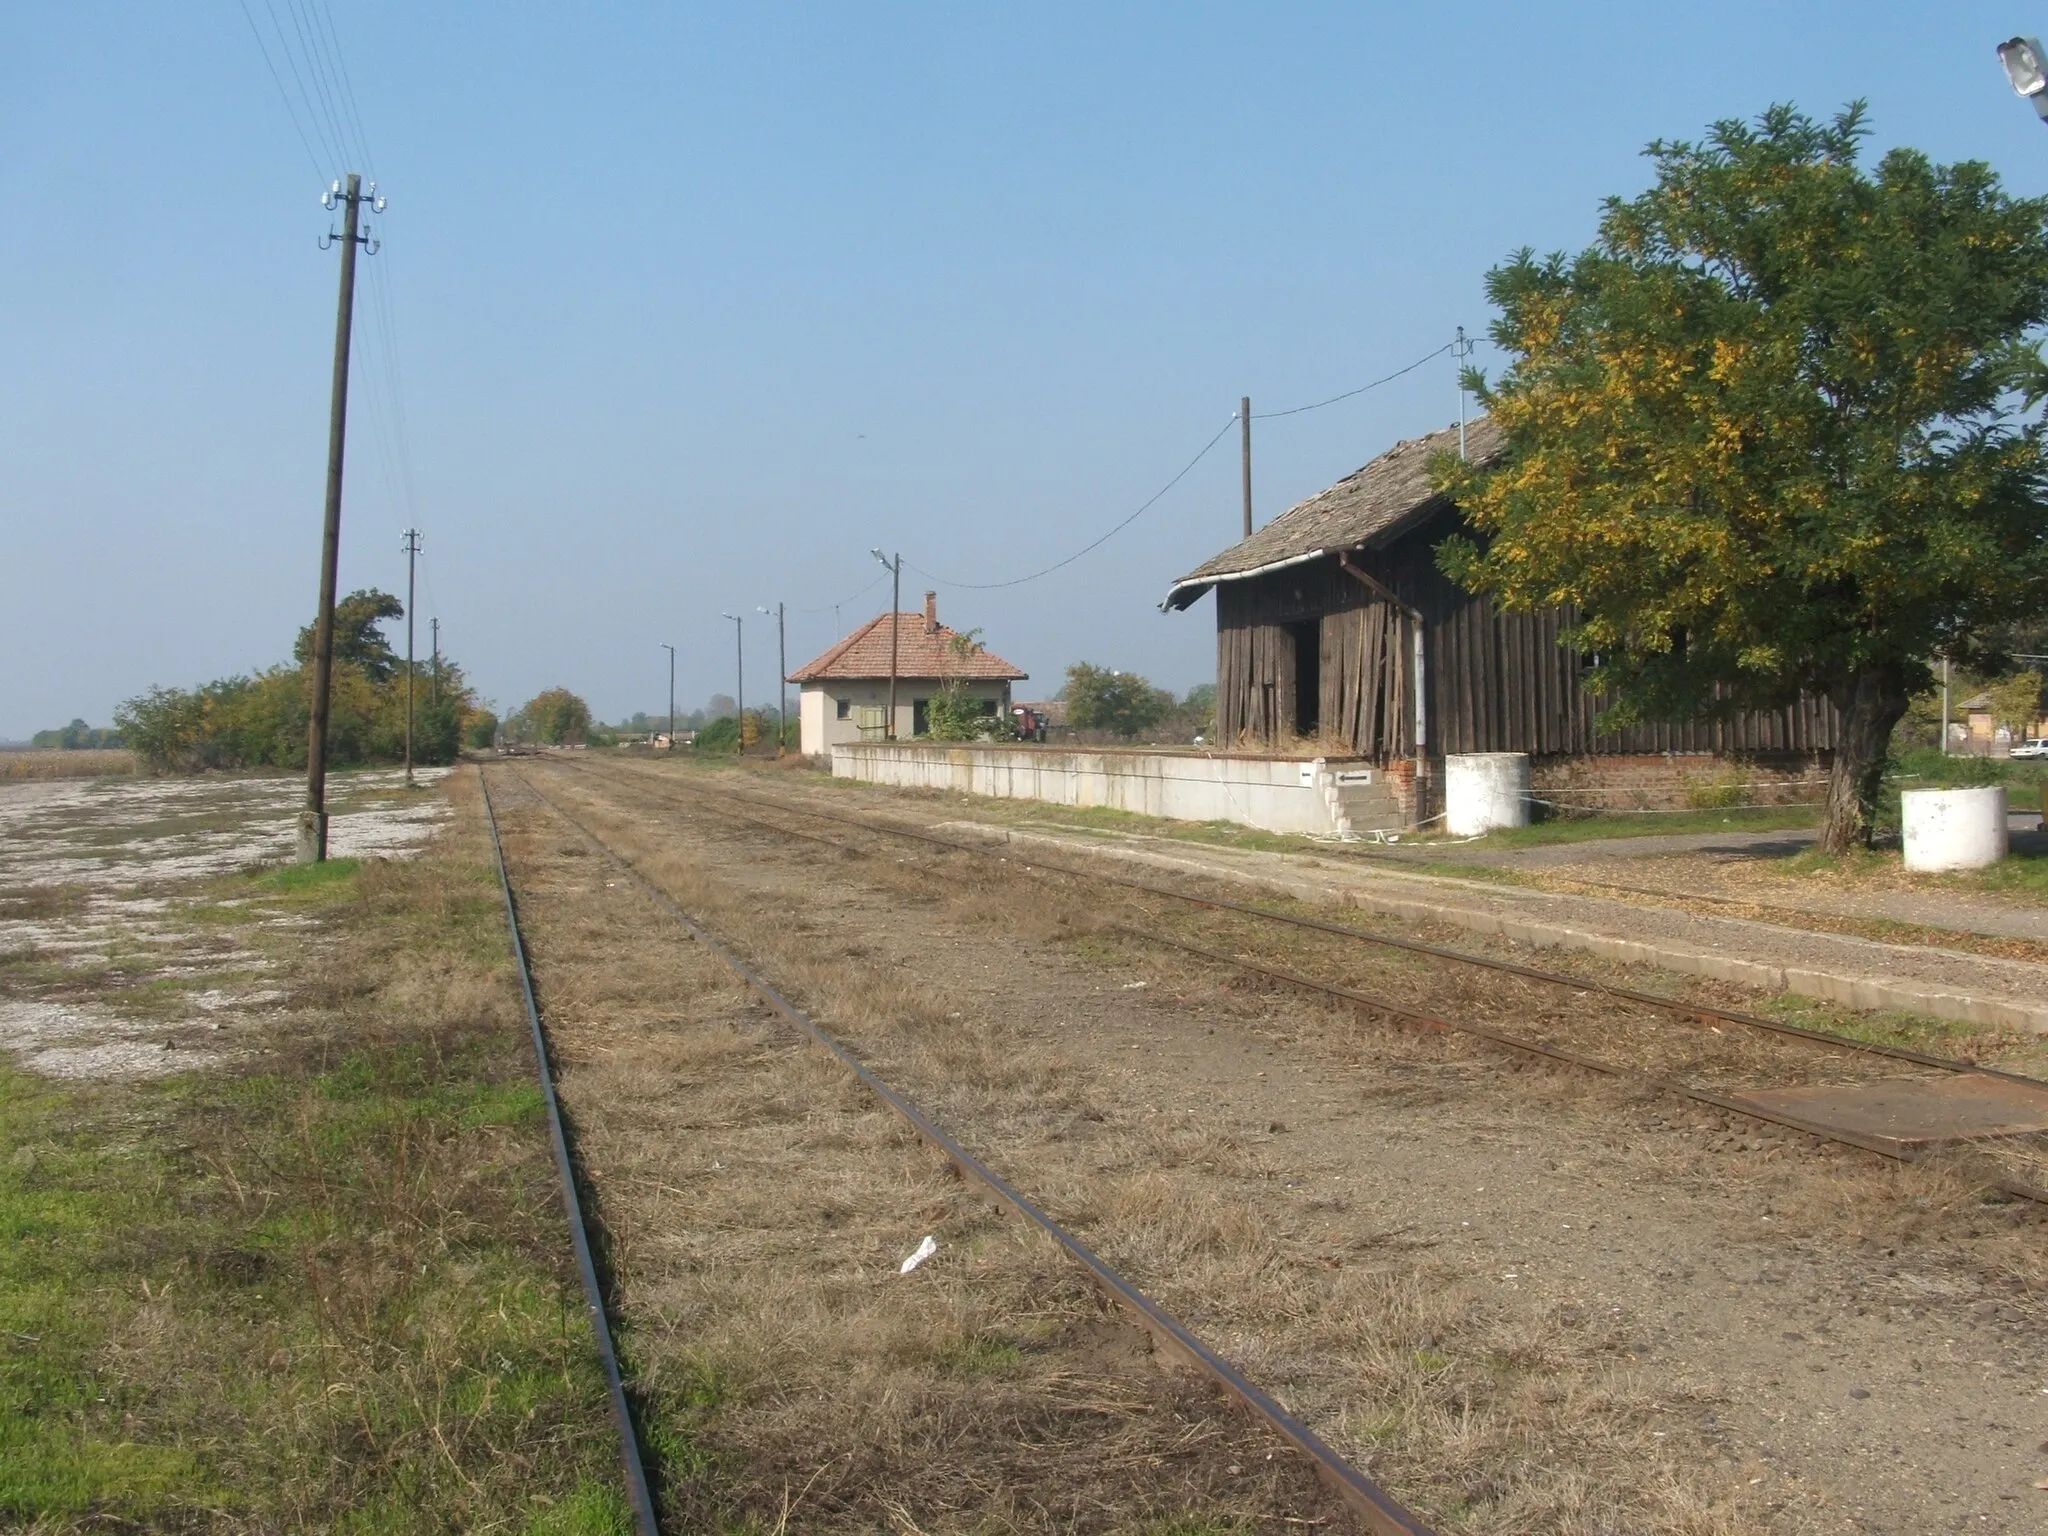 Photo showing: Railway tracks in Gádoros station, Hungary